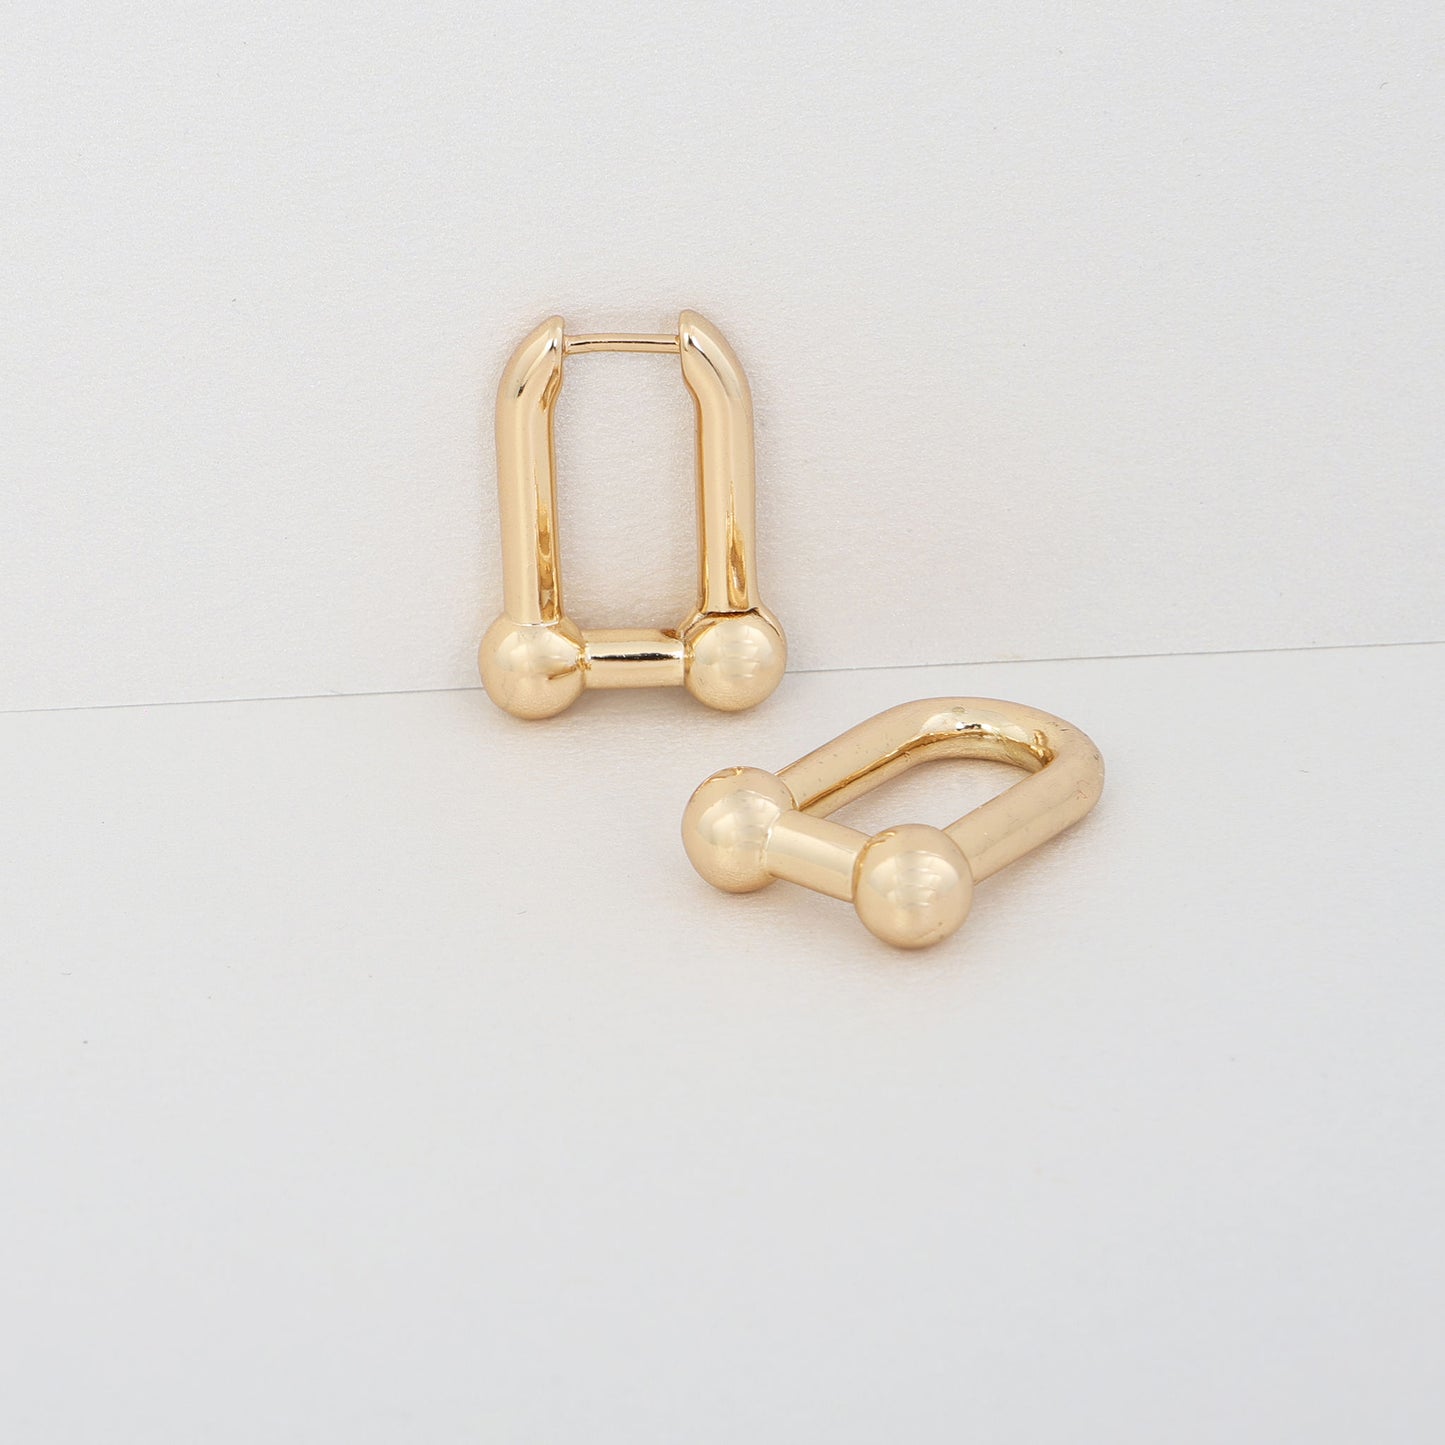 Add a trendy fashion element to all your favourite looks with these earrings in yellow gold.